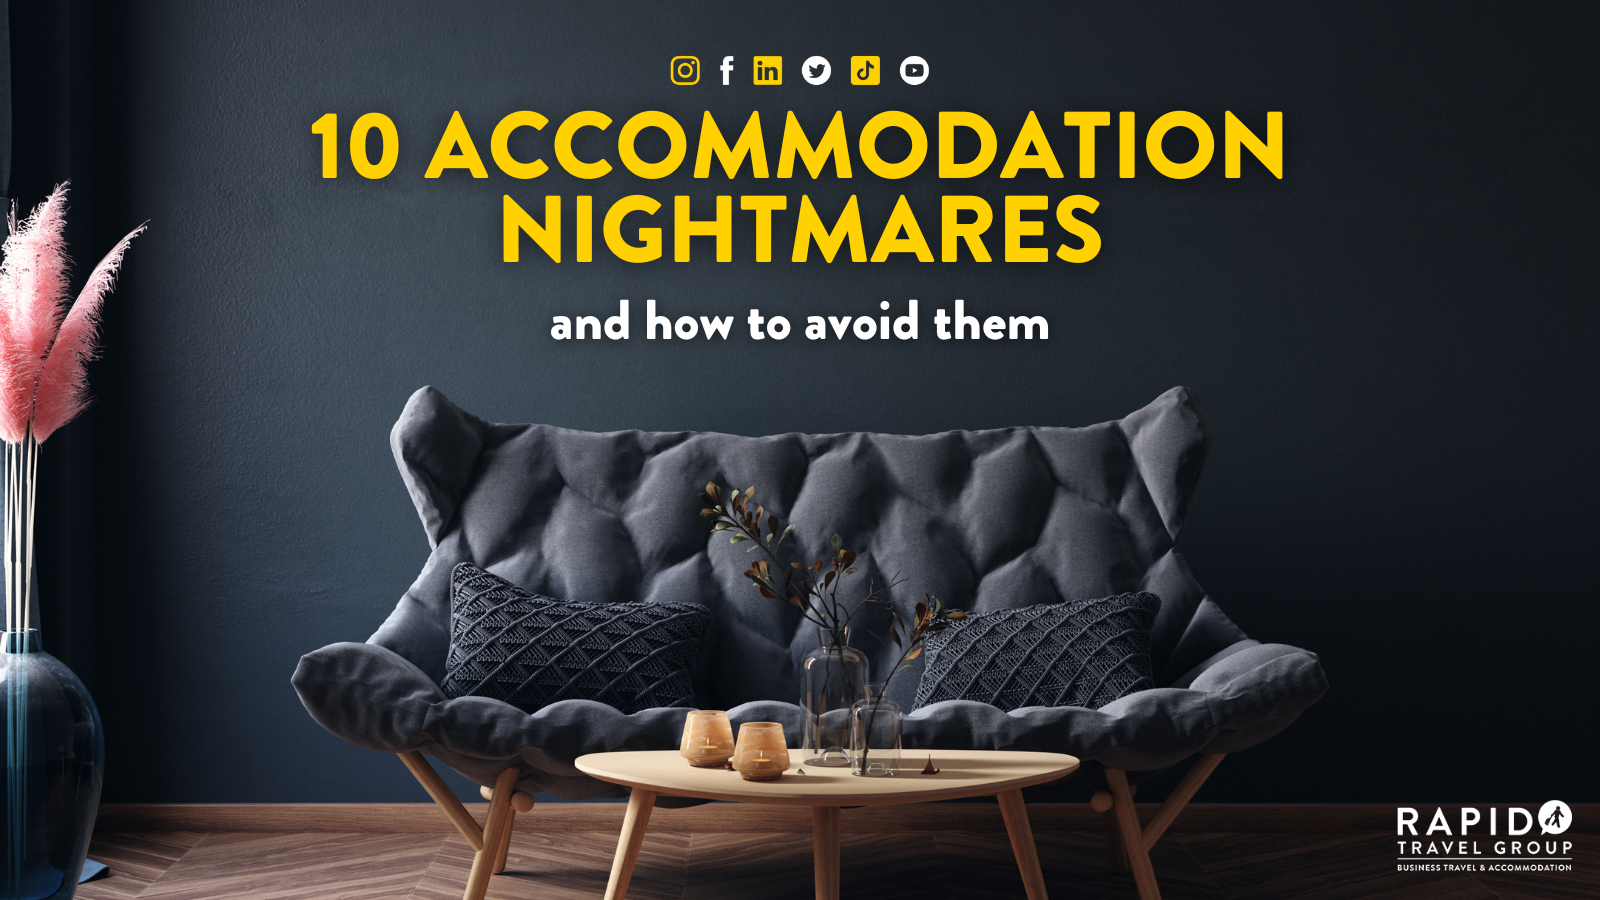 10 accommodation nightmares and how to avoid them